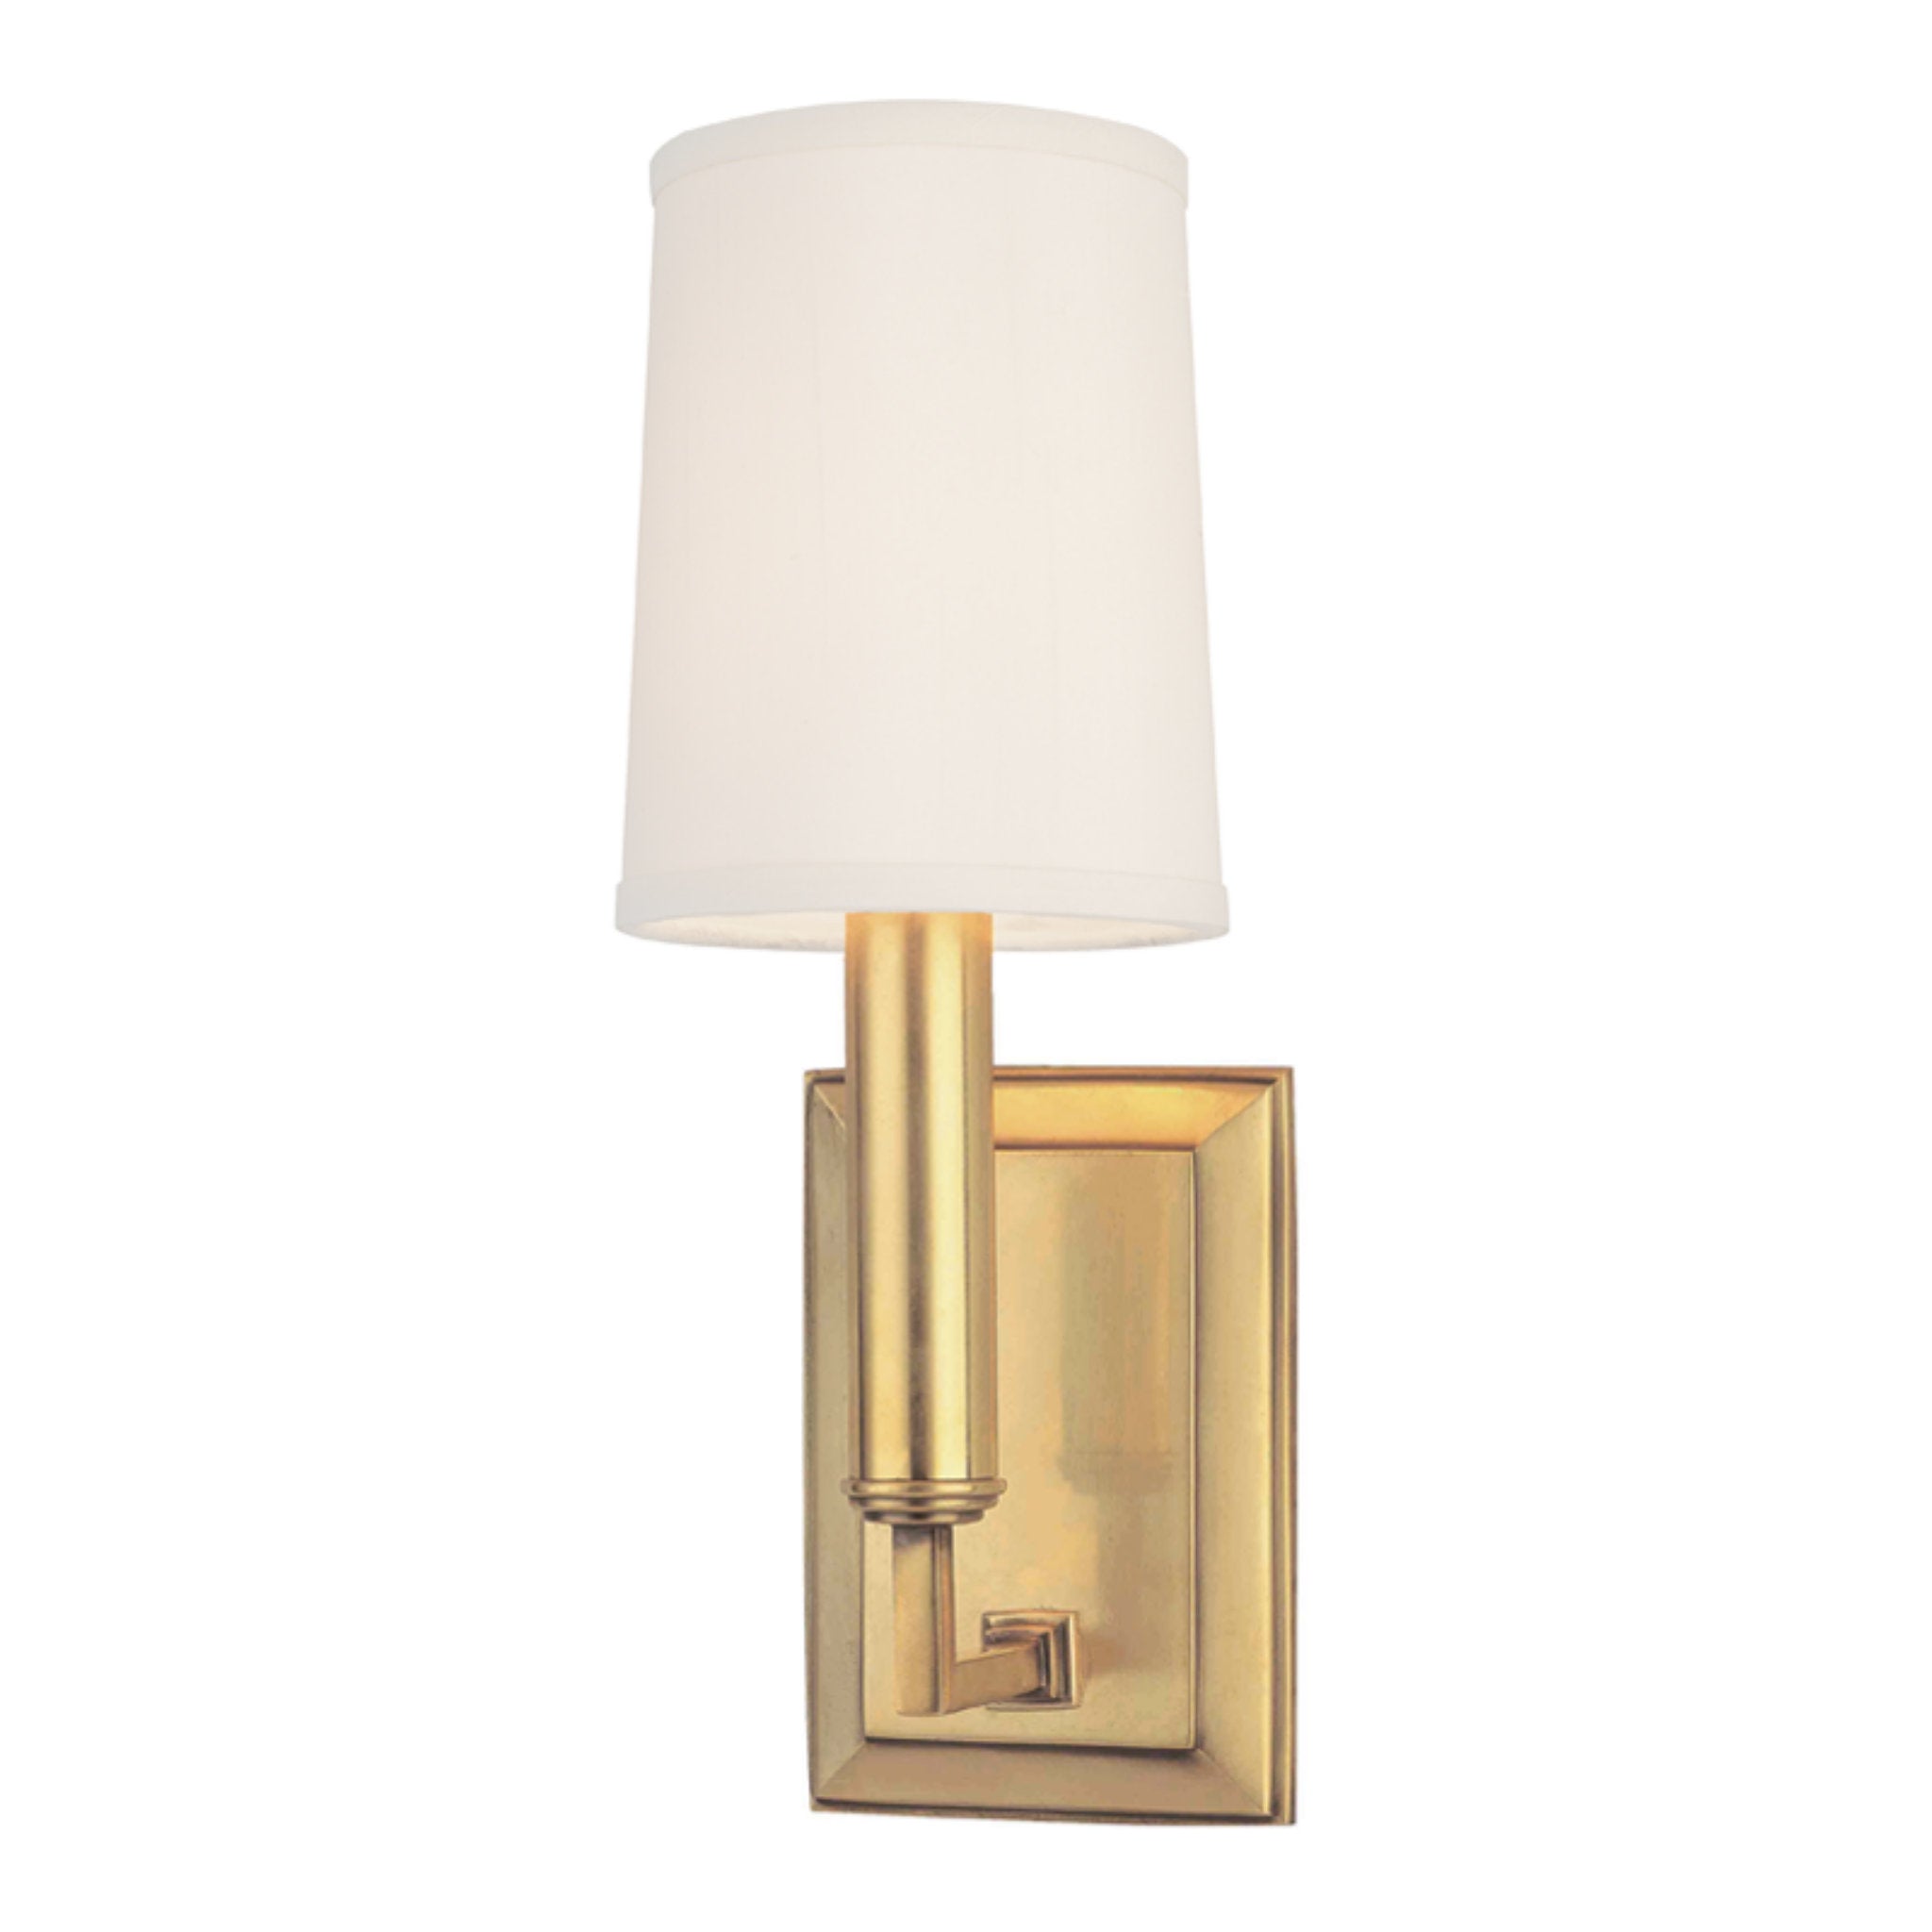 Clinton 1 Light Wall Sconce in Aged Brass